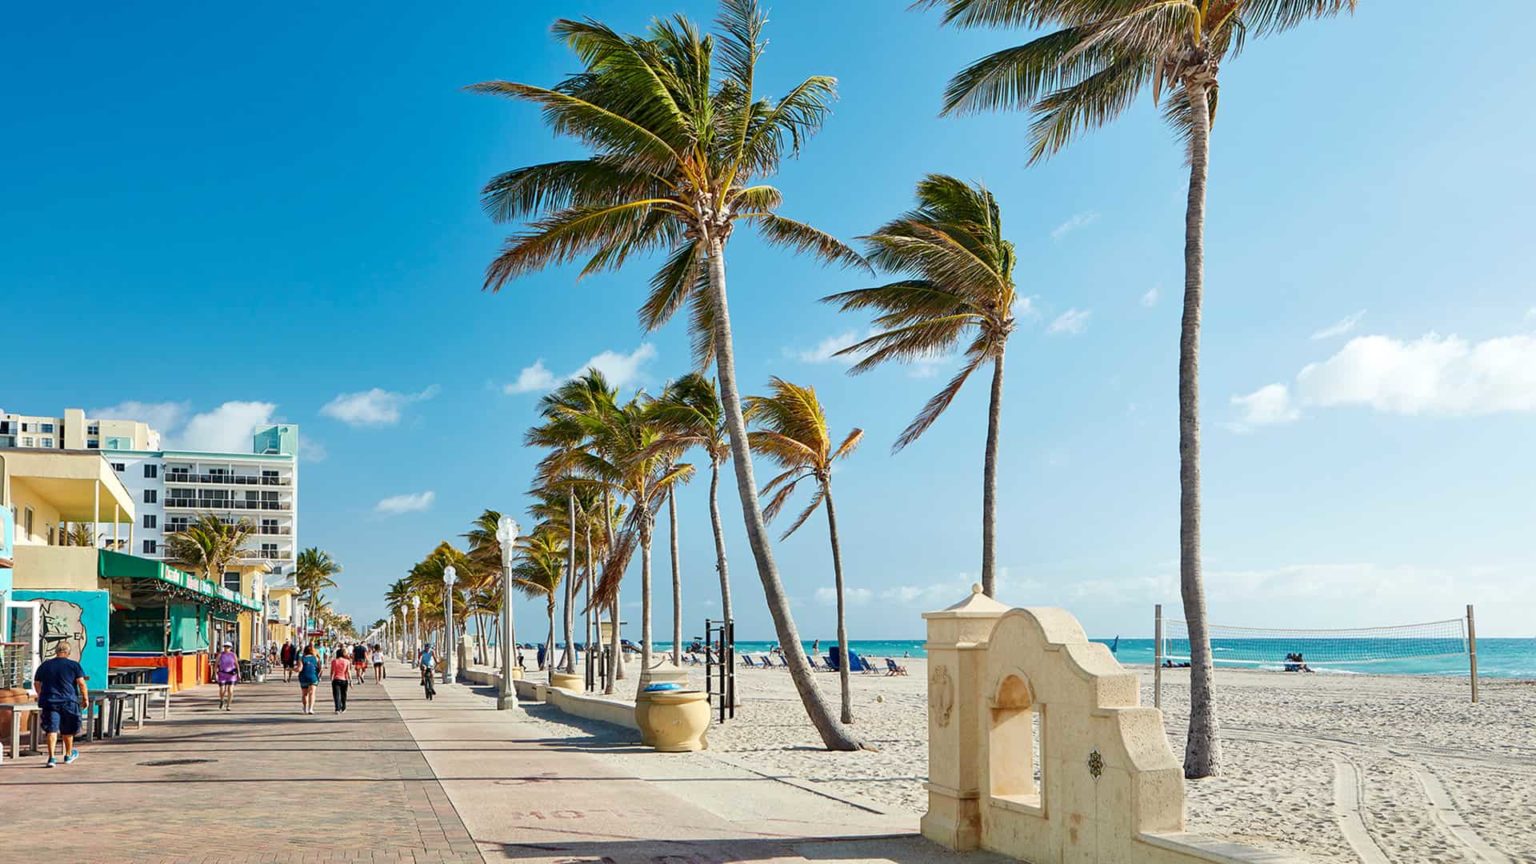 Hollywood Beach Boardwalk lined with palm trees